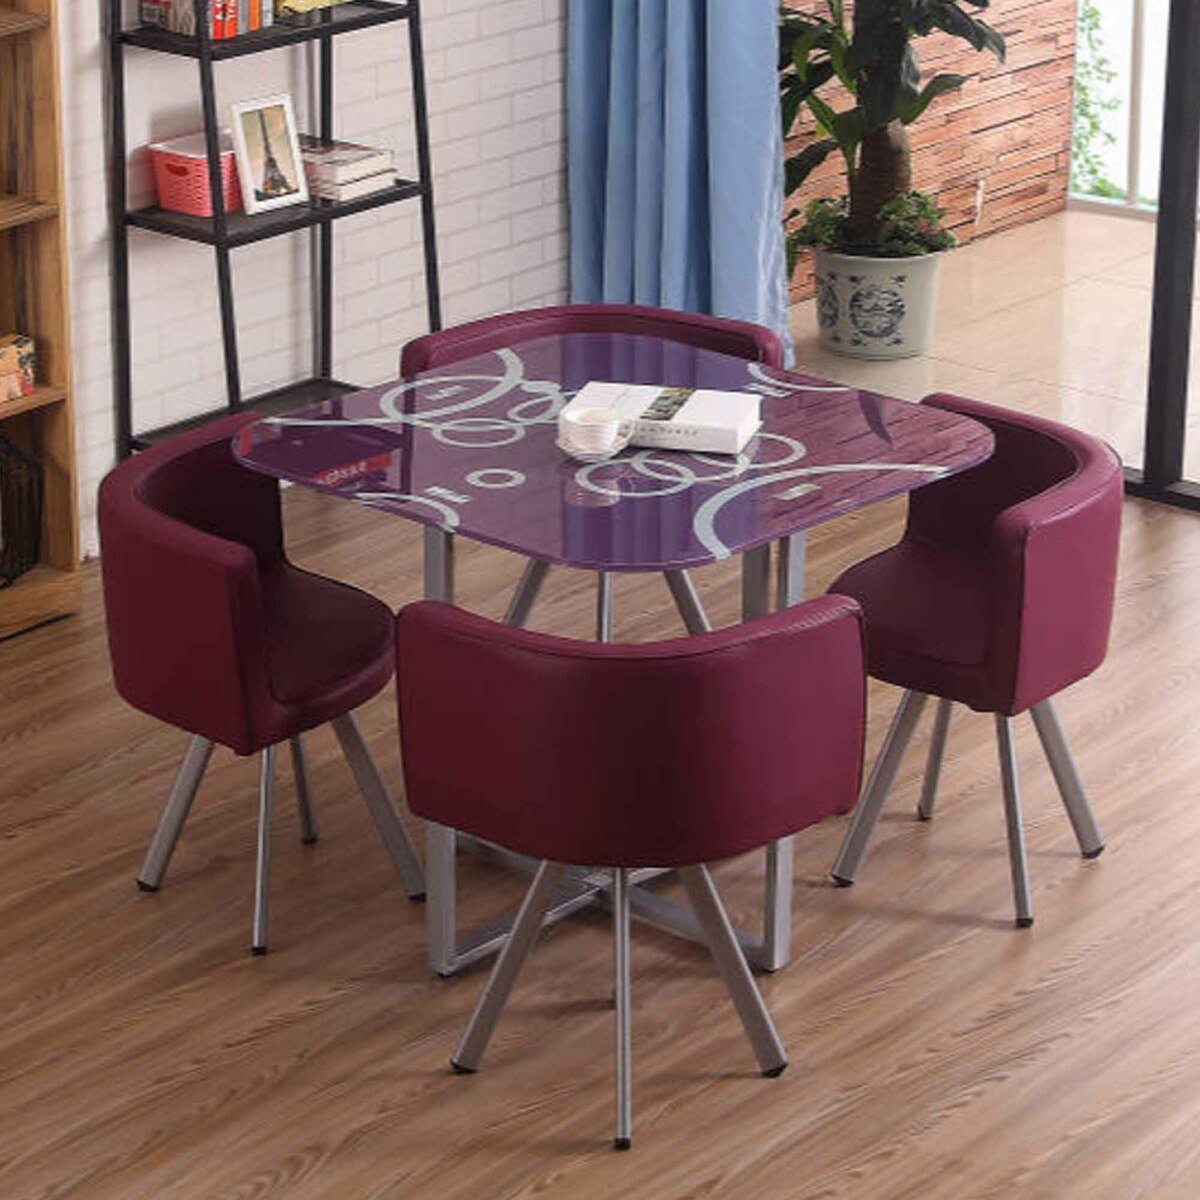 Maple Leaf Home Glass Dining Table Size: H75 x W90 x L90cm + 4 Chair Purple Color